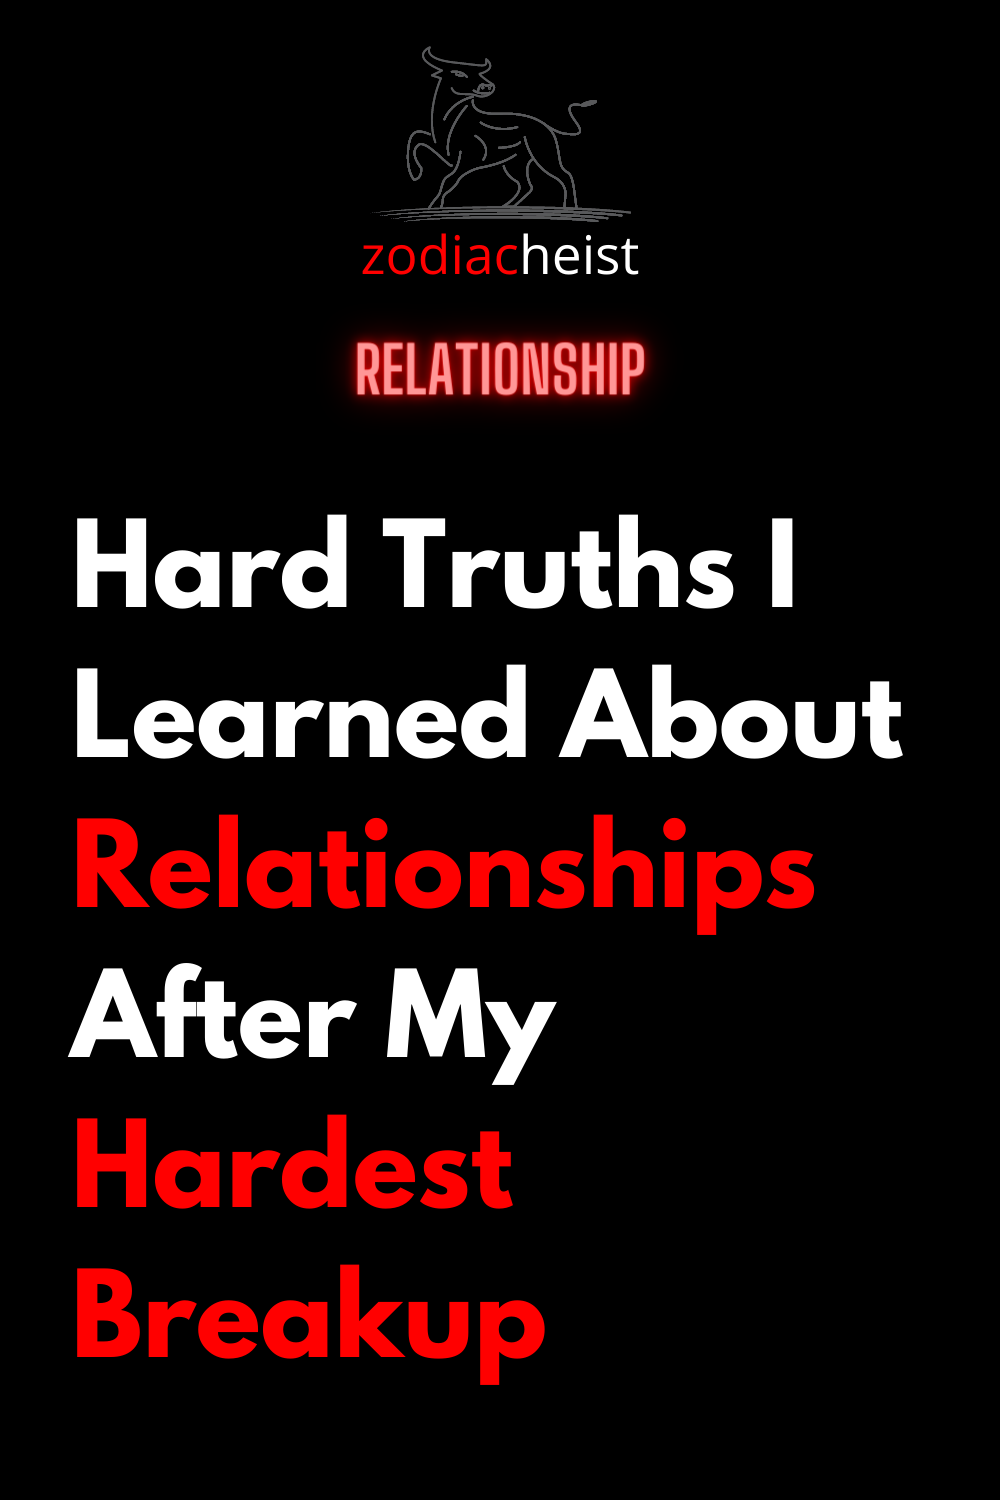 Hard Truths I Learned About Relationships After My Hardest Breakup